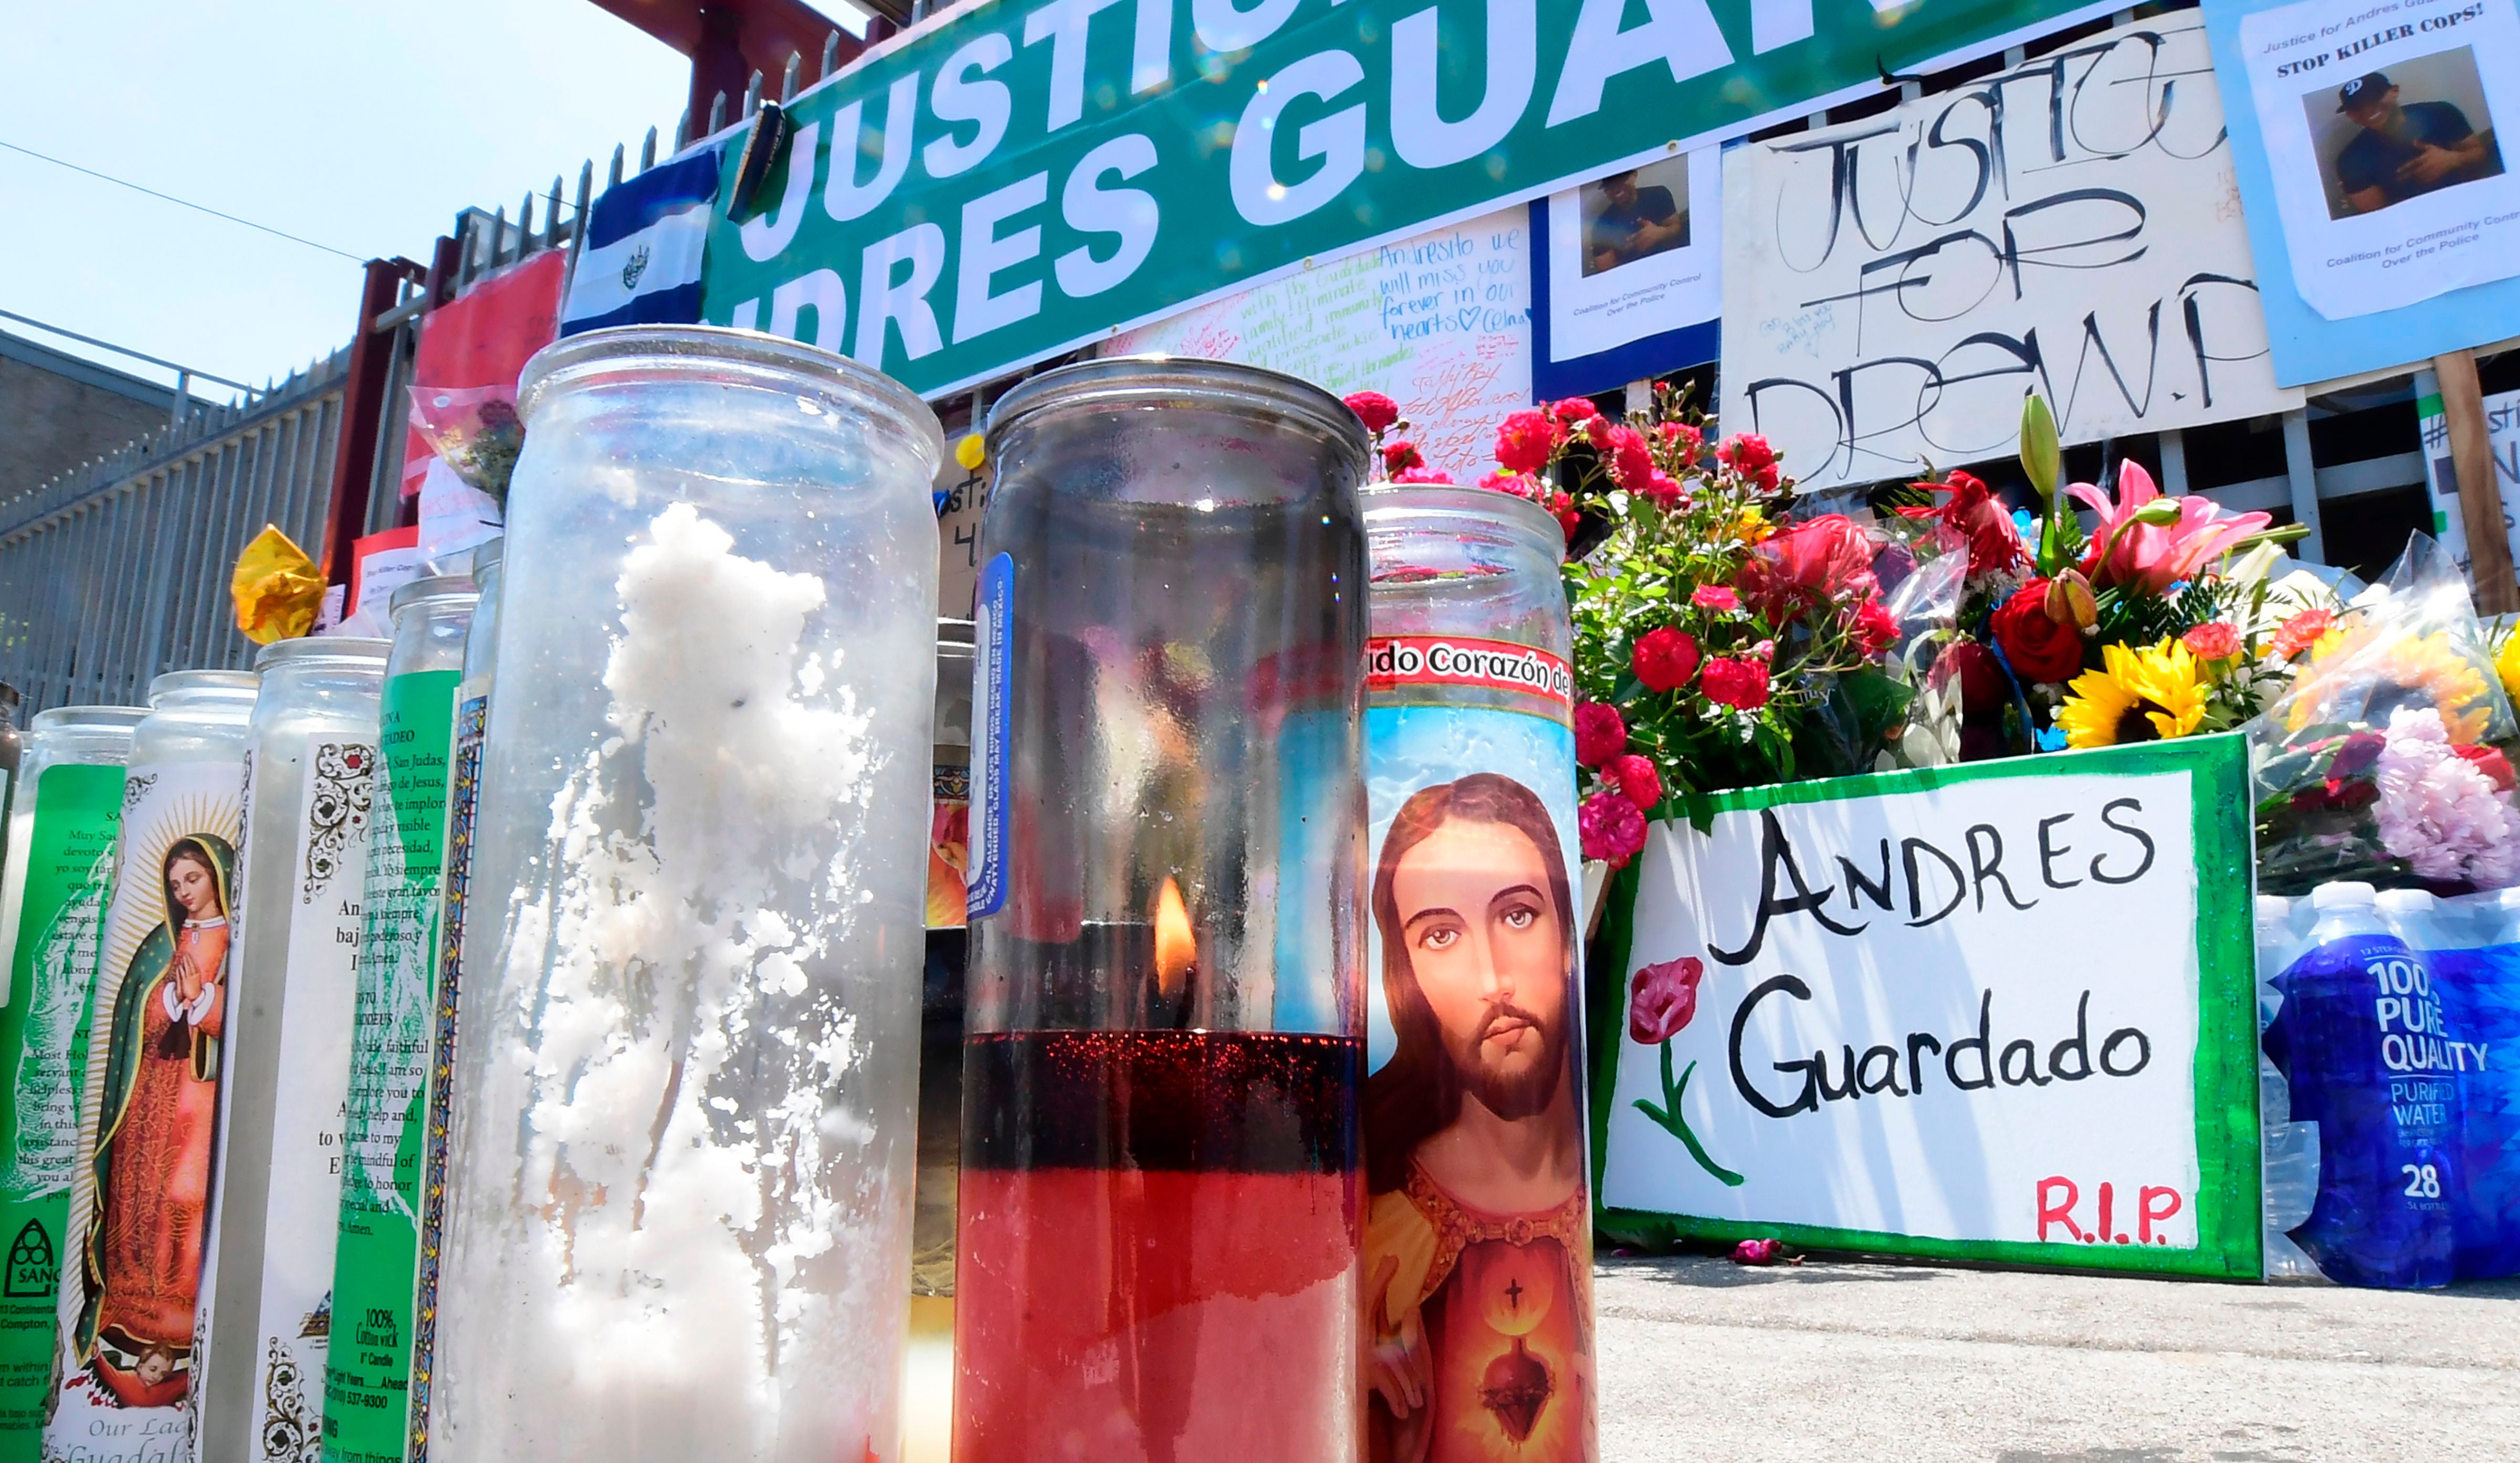 Family of Andres Guardado allege he was killed as result of police gang initiation